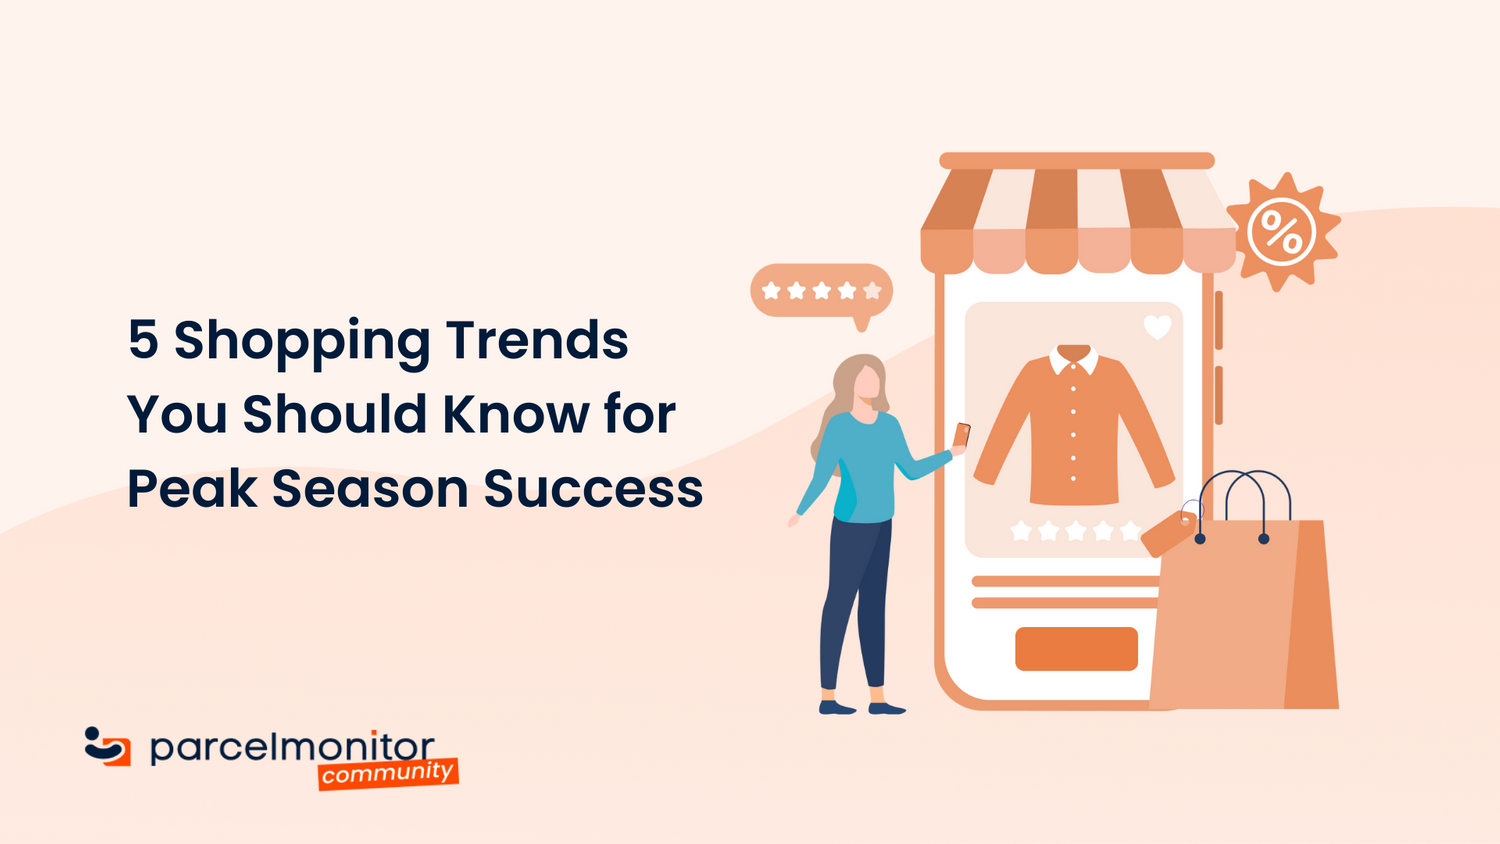 5 Shopping Trends You Should Know for Peak Season Success